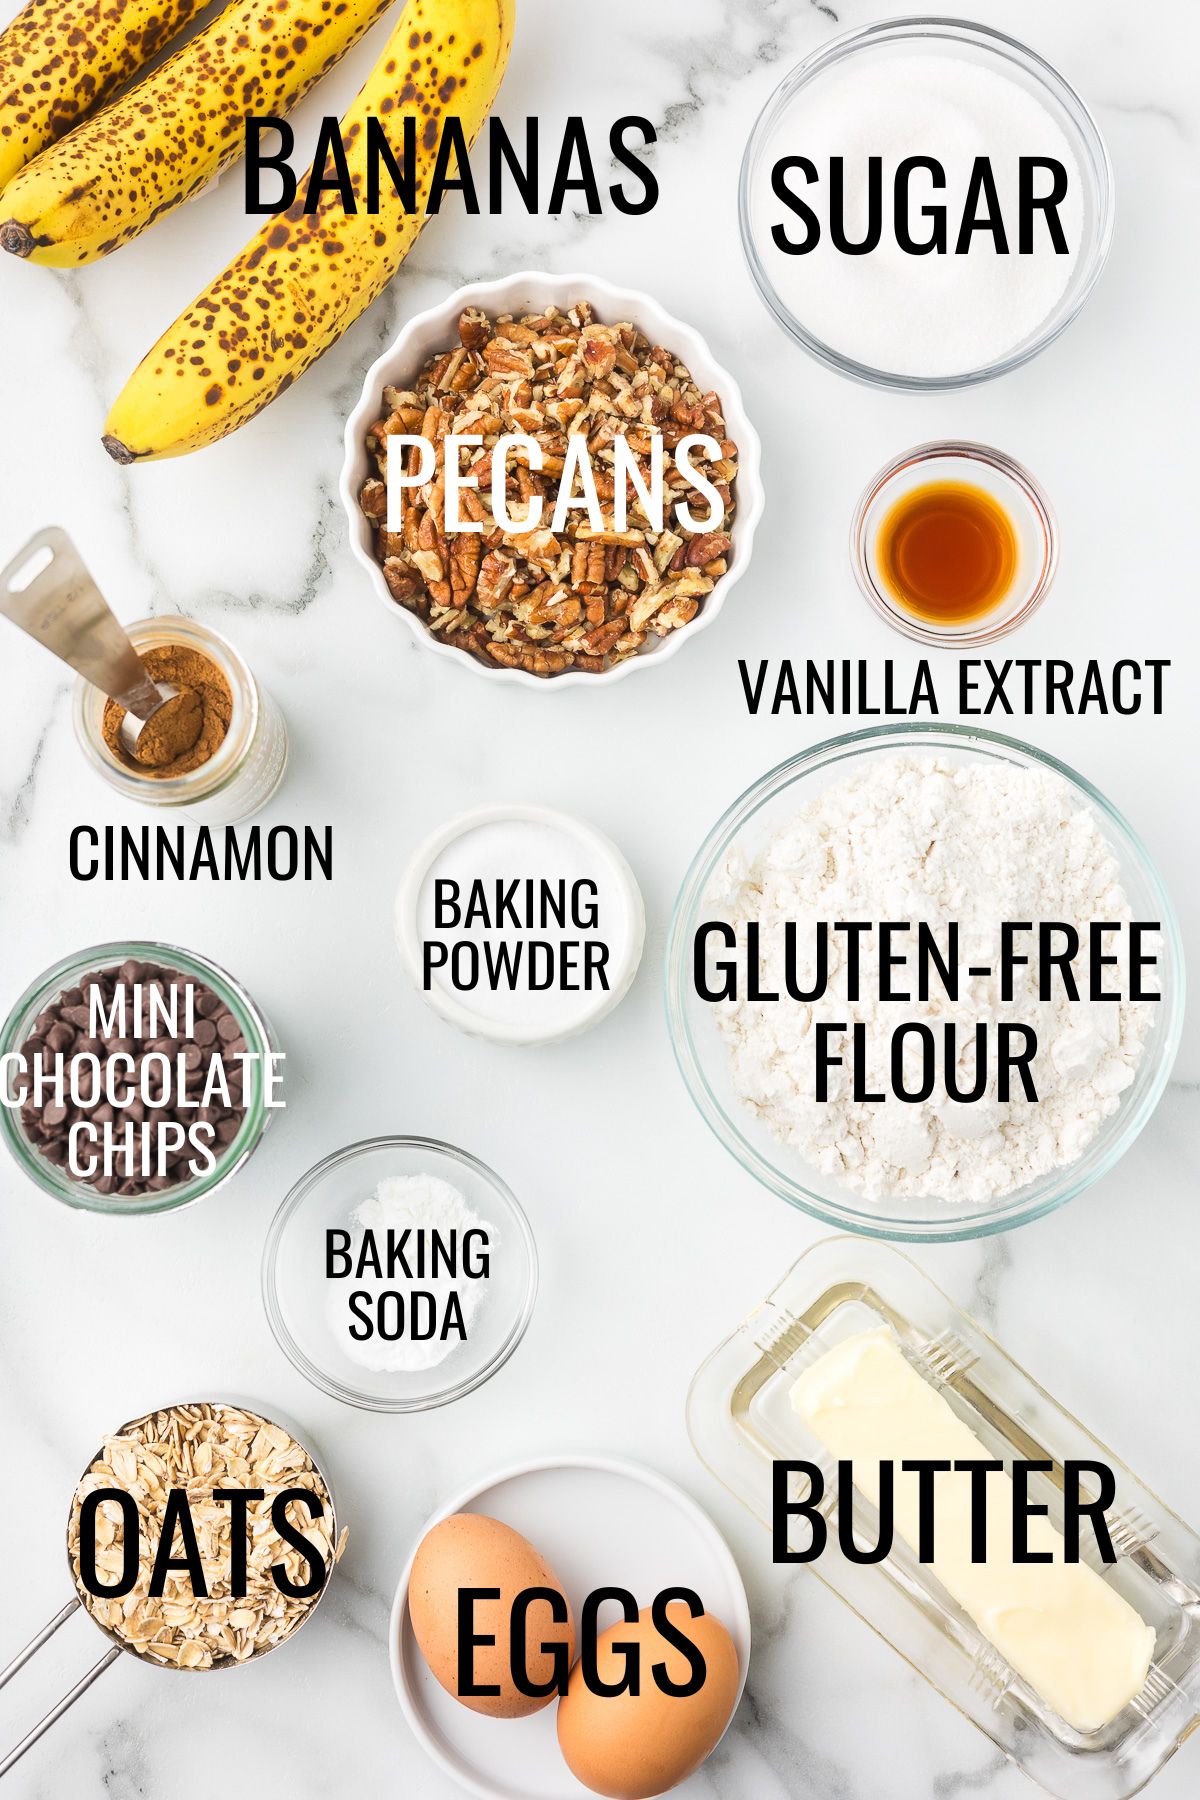 gluten free flour, butter, eggs, oats, sugar, bananas, pecans, chocolate chips, and other baking ingredients in small bowls